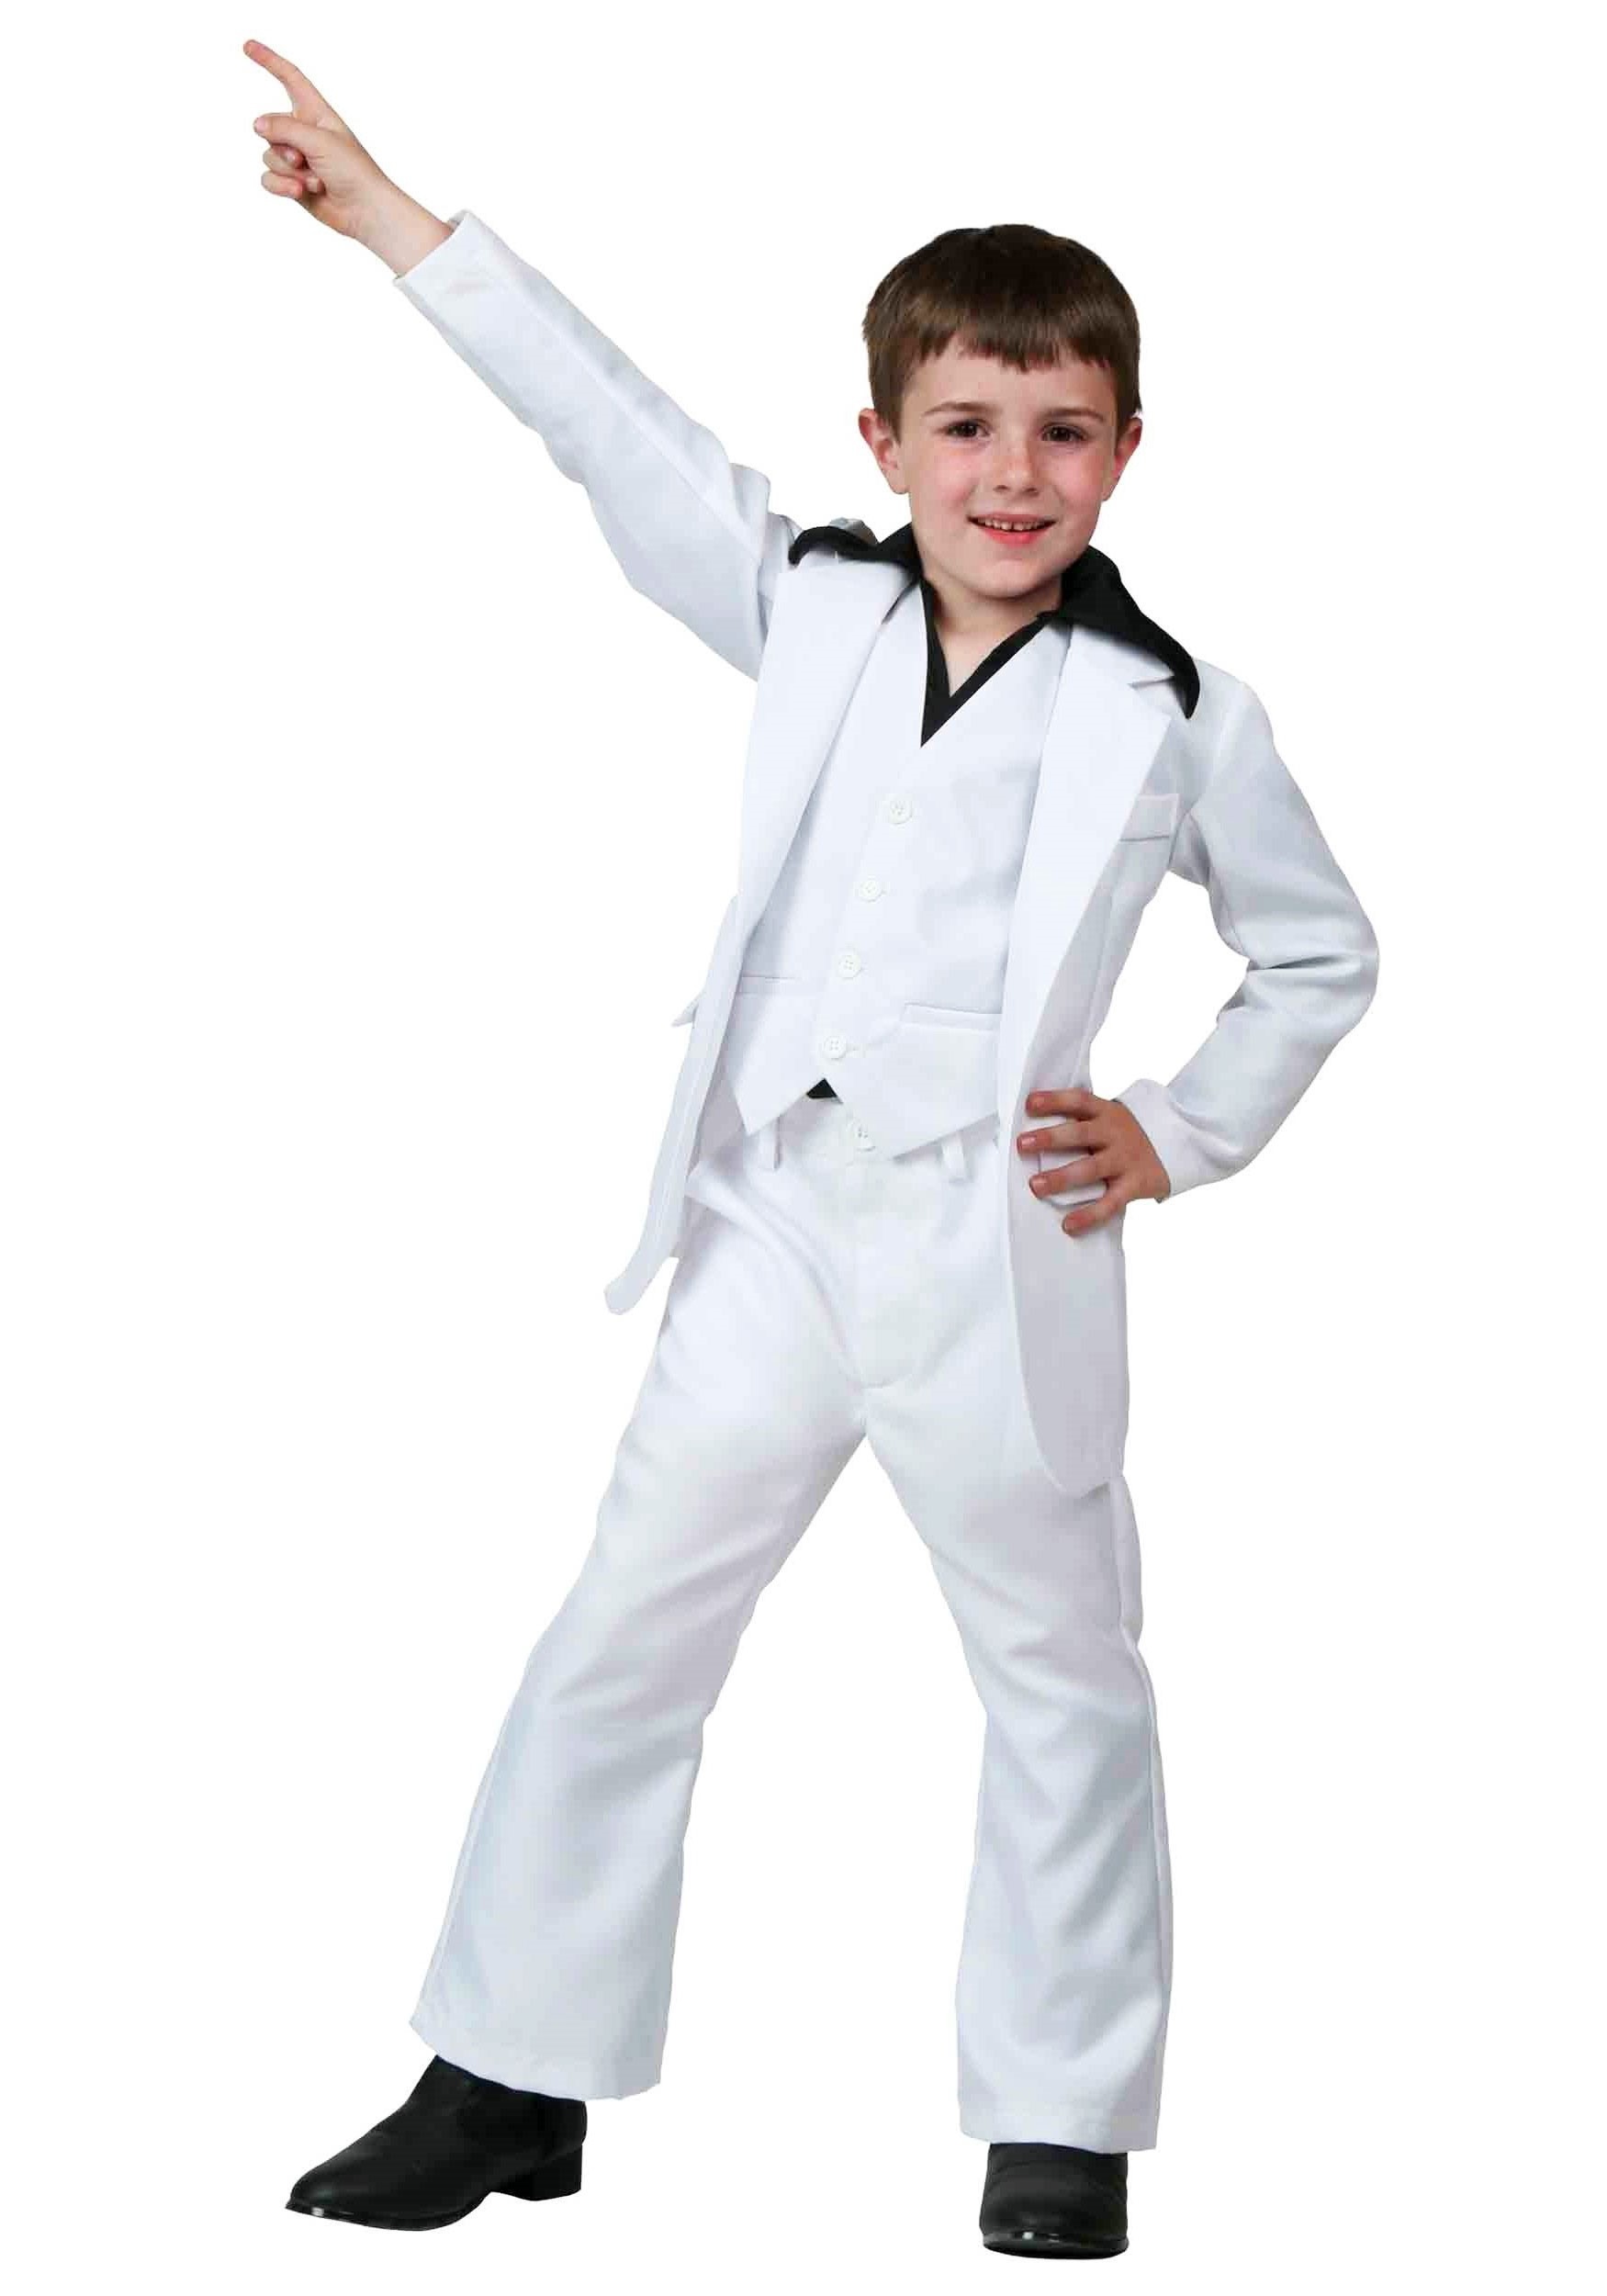 Photos - Fancy Dress Deluxe FUN Costumes  Saturday Night Fever Costume for Kids Black/White 